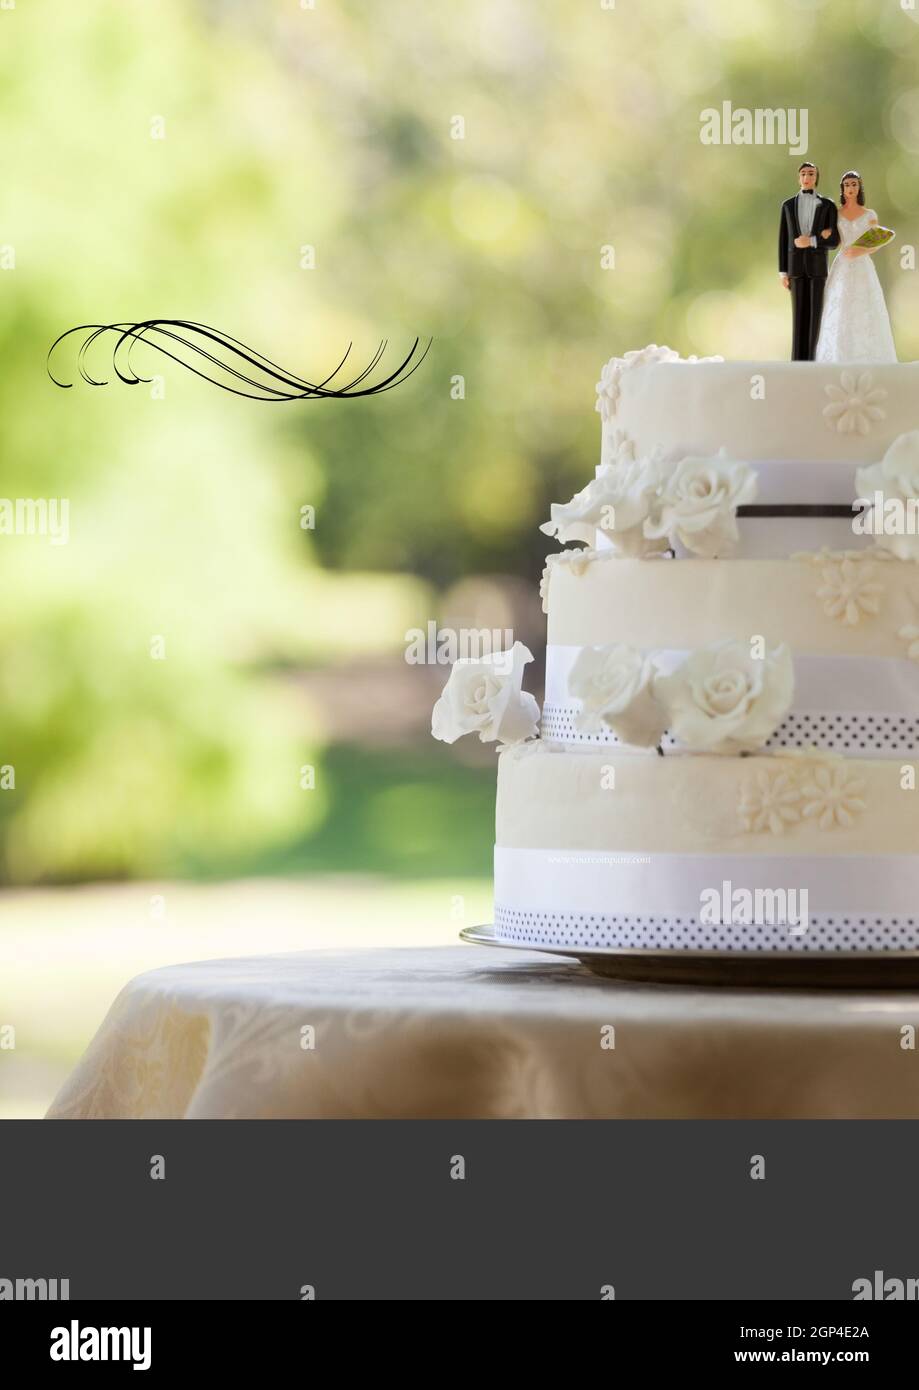 Composition of black lines and wedding cake outdoors Stock Photo